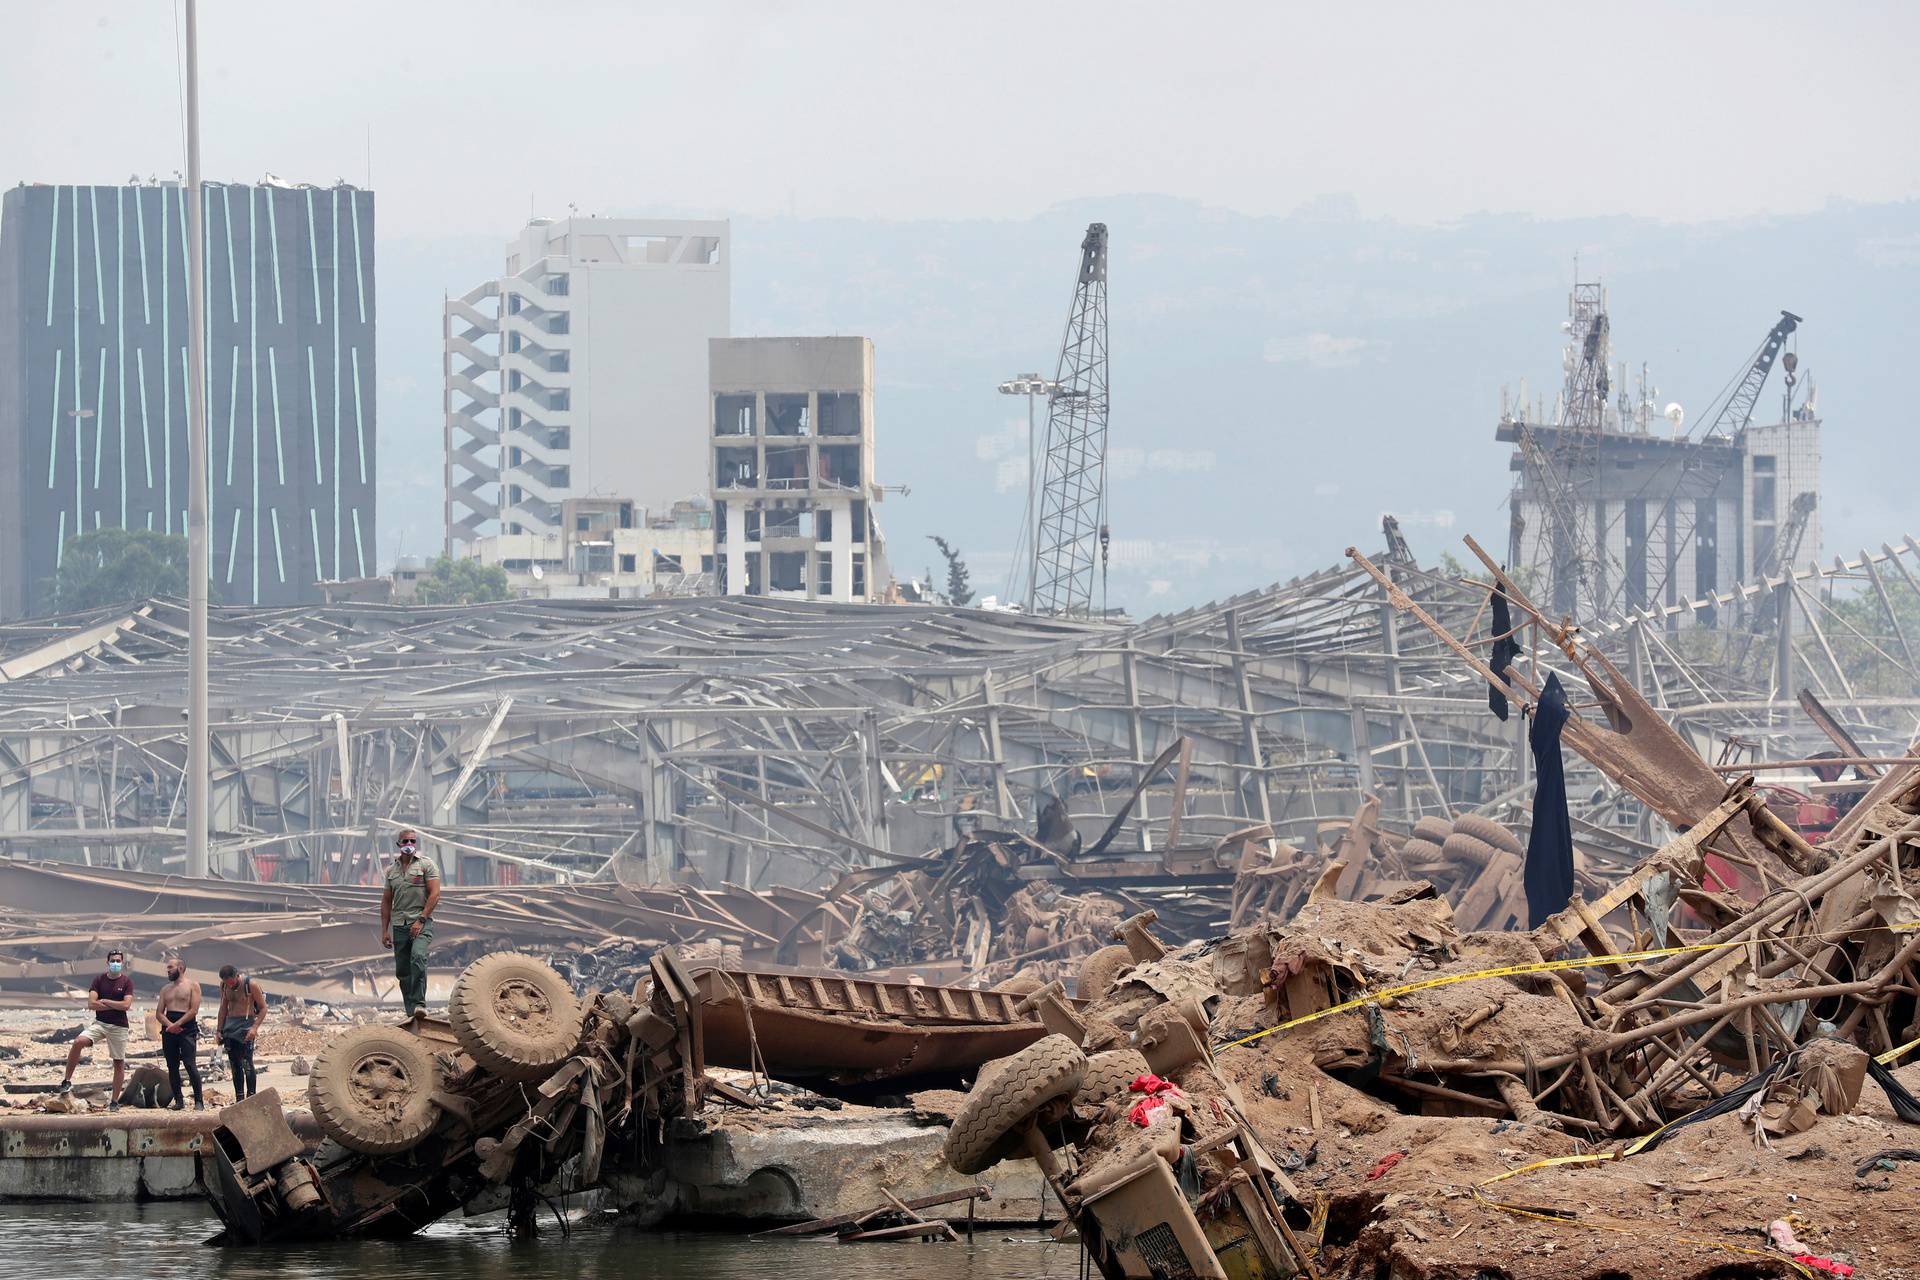 People are pictured at the devastated site of the explosion at the port of Beirut